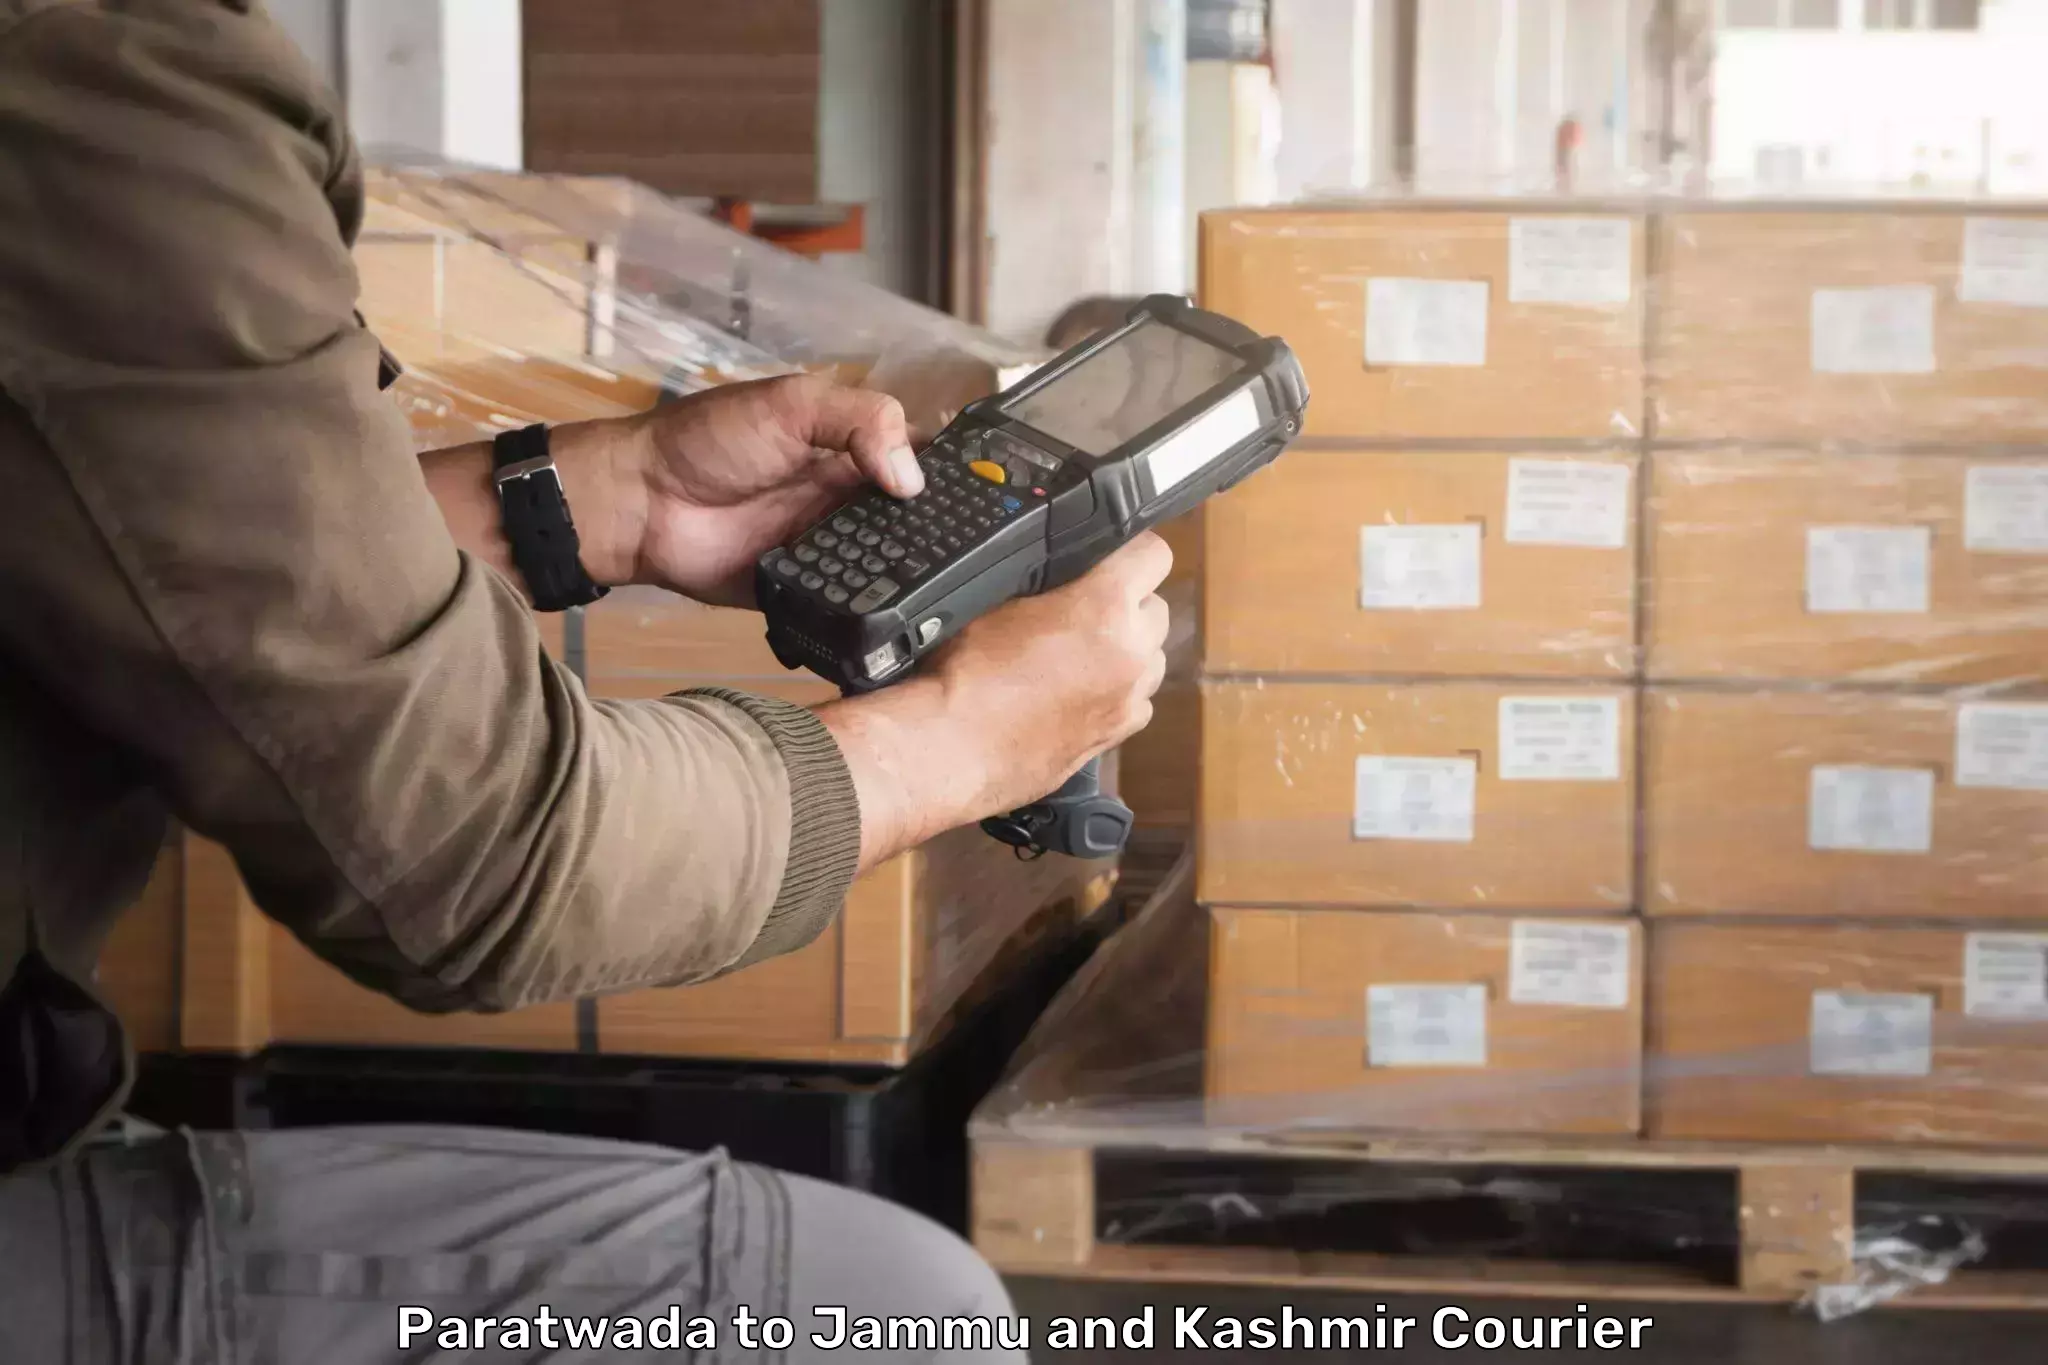 Courier insurance Paratwada to Baramulla